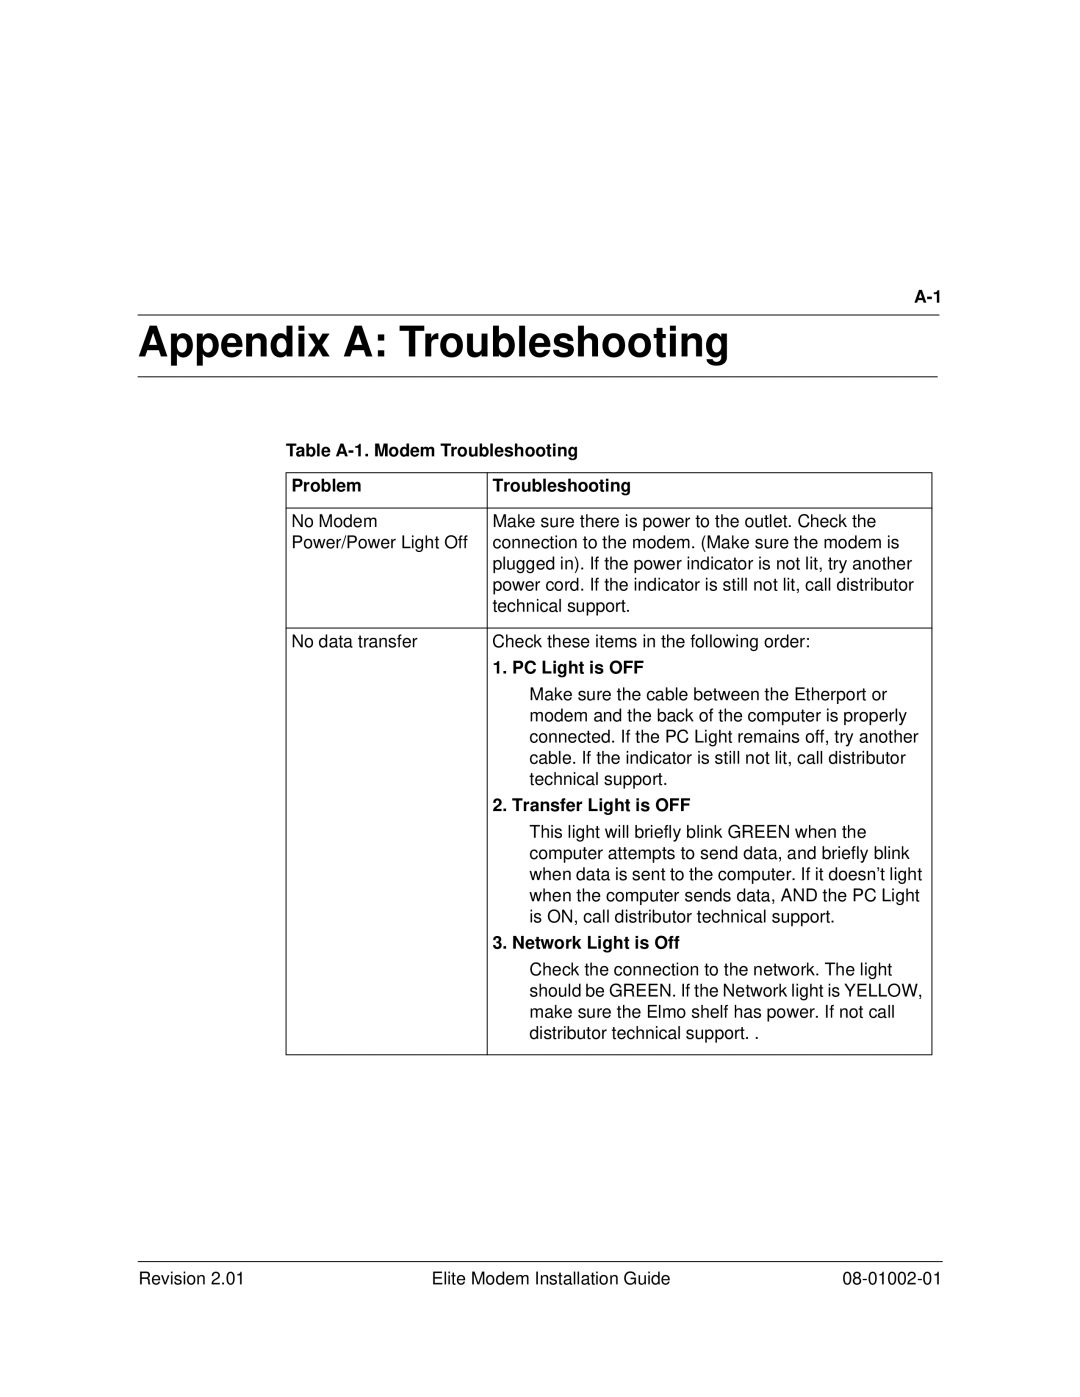 Zhone Technologies 08-01002-01 Appendix A Troubleshooting, Table A-1. Modem Troubleshooting, Problem, PC Light is OFF 